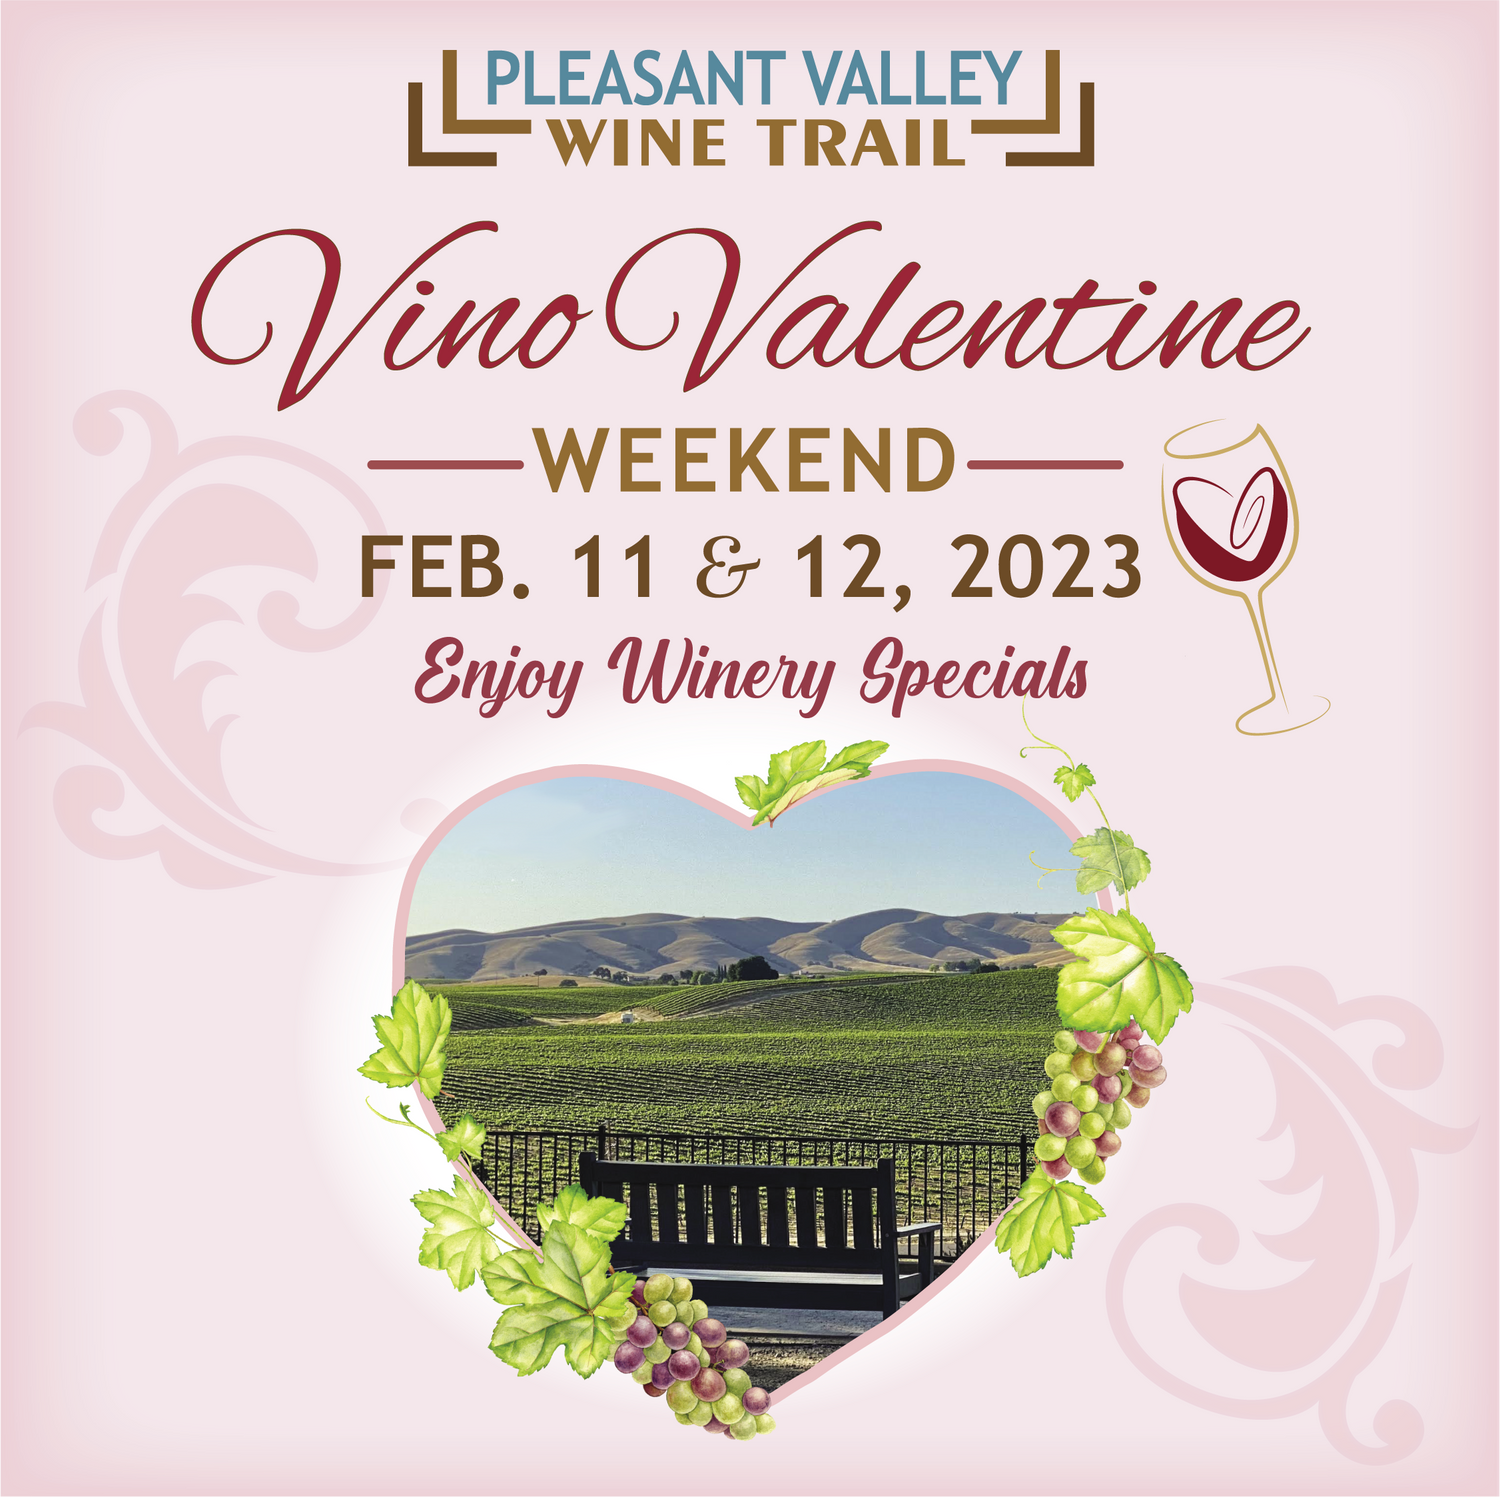 Vino Valentine with the Pleasant Valley Wine Trail in San Miguel, CA